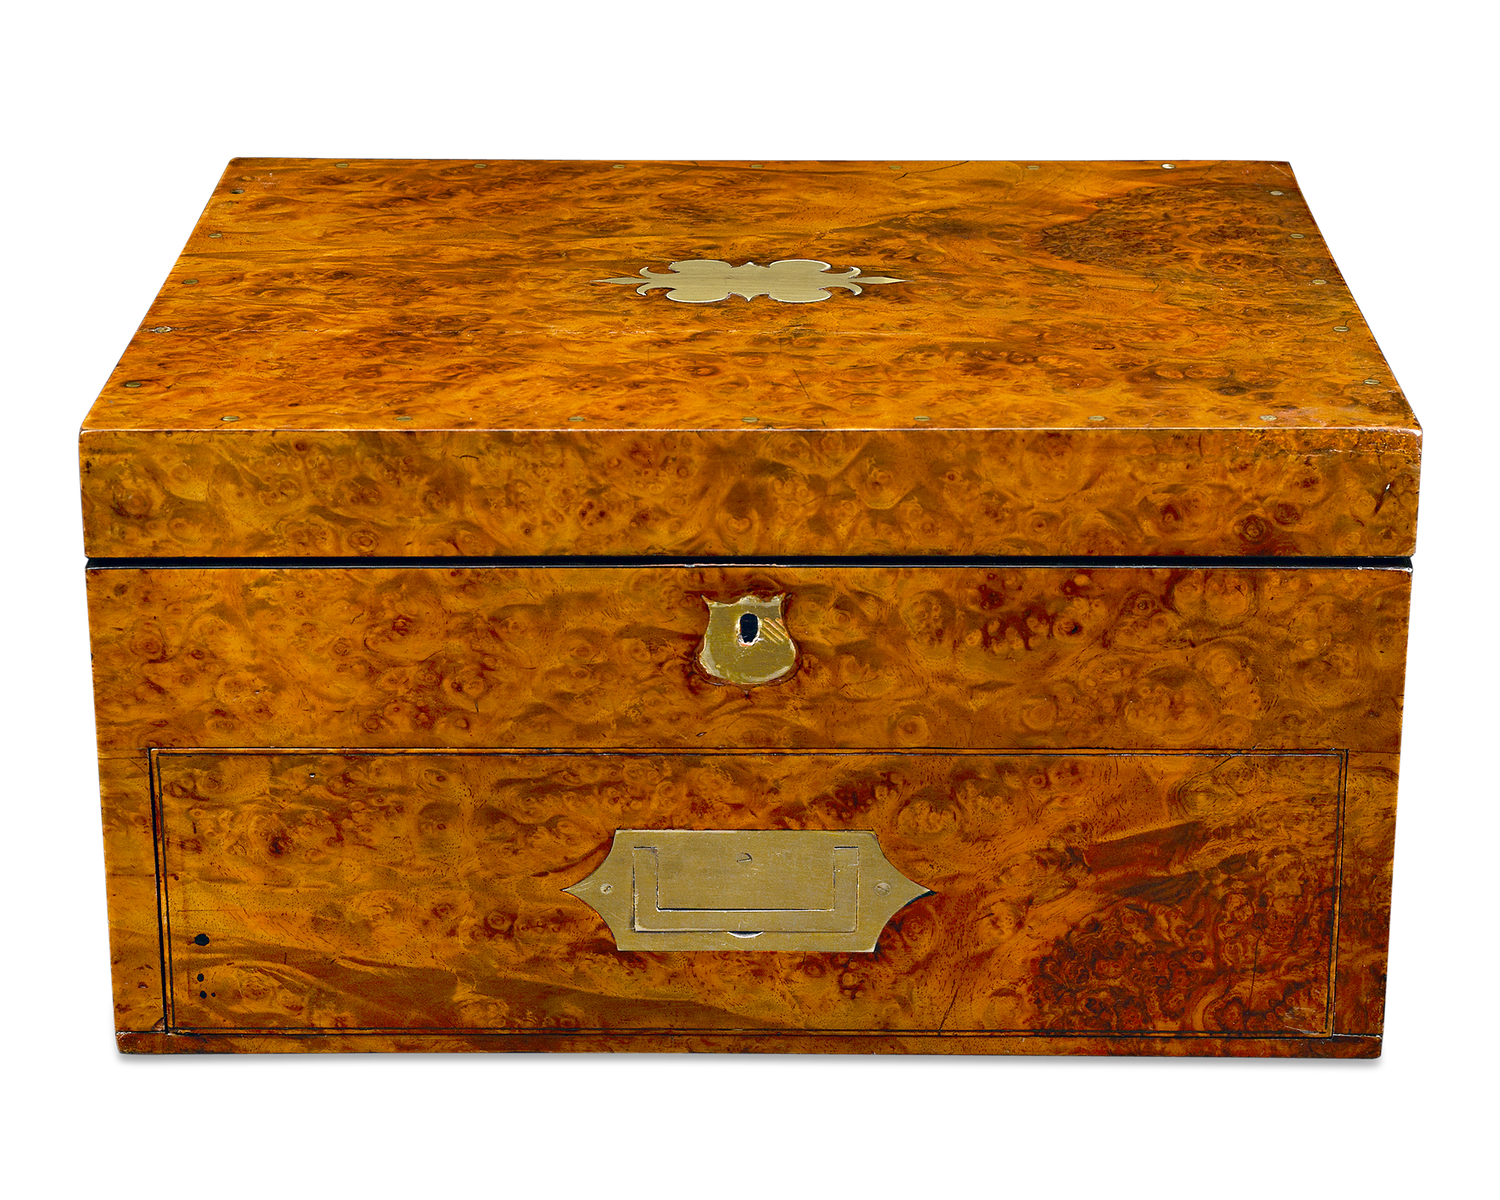 The case is crafted of burl walnut with flushed brass fittings